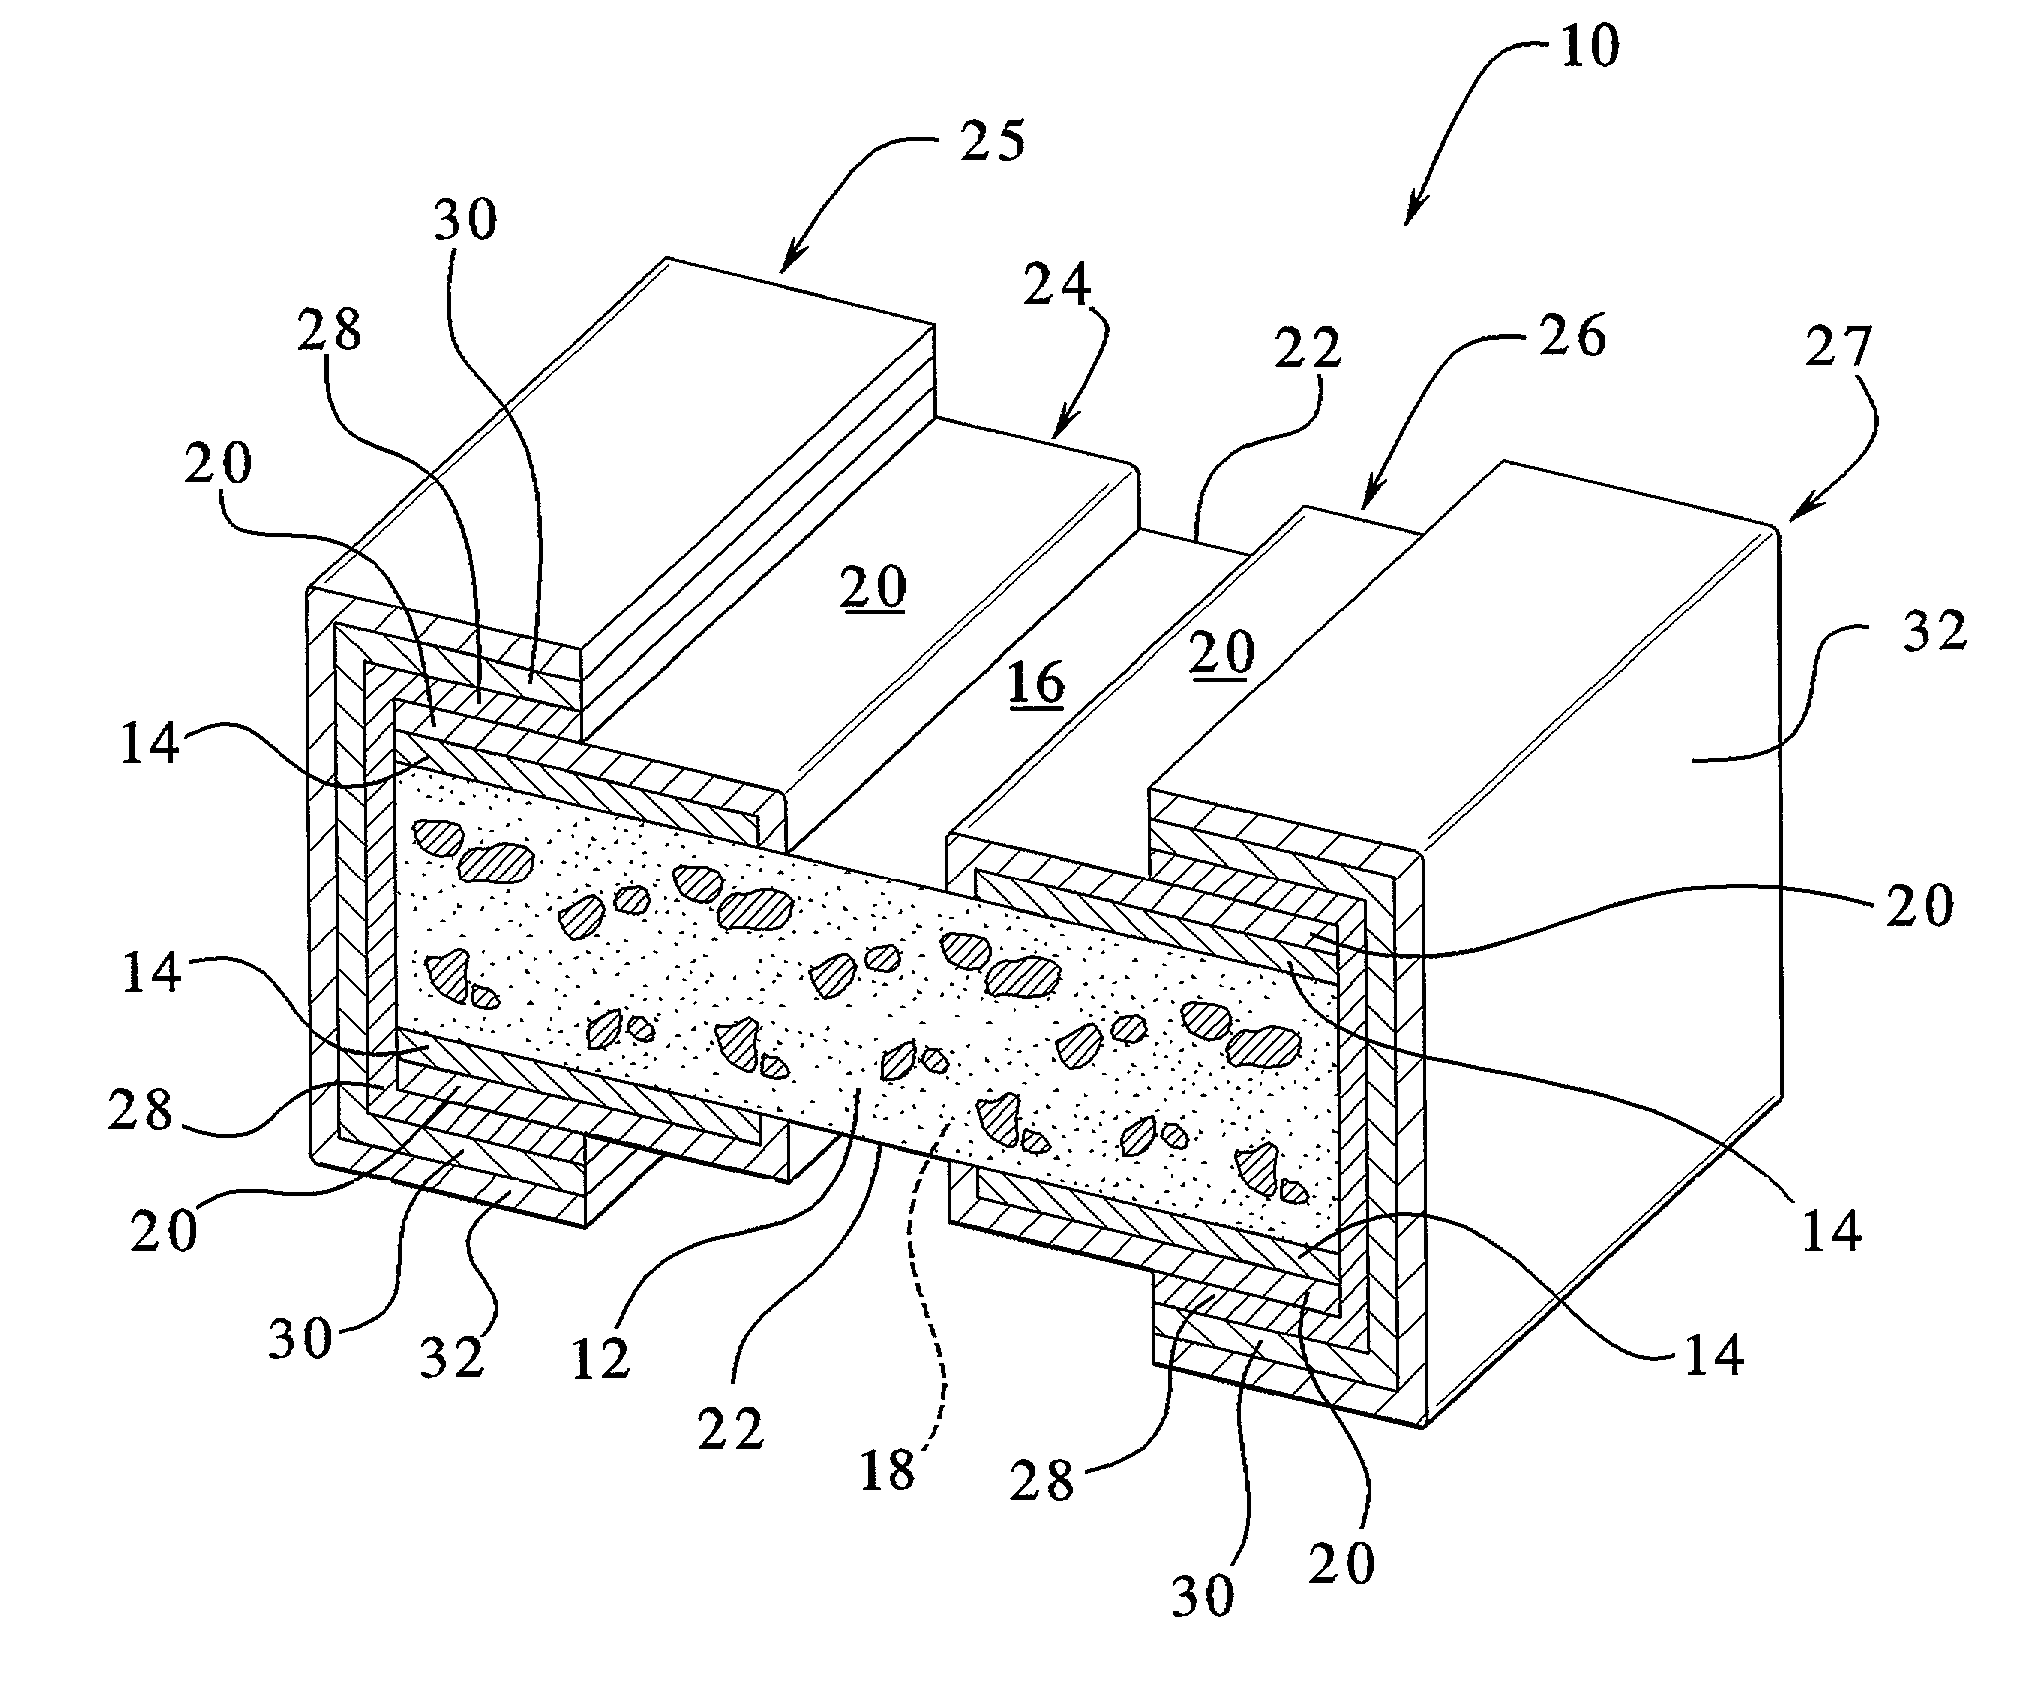 Voltage variable substrate material